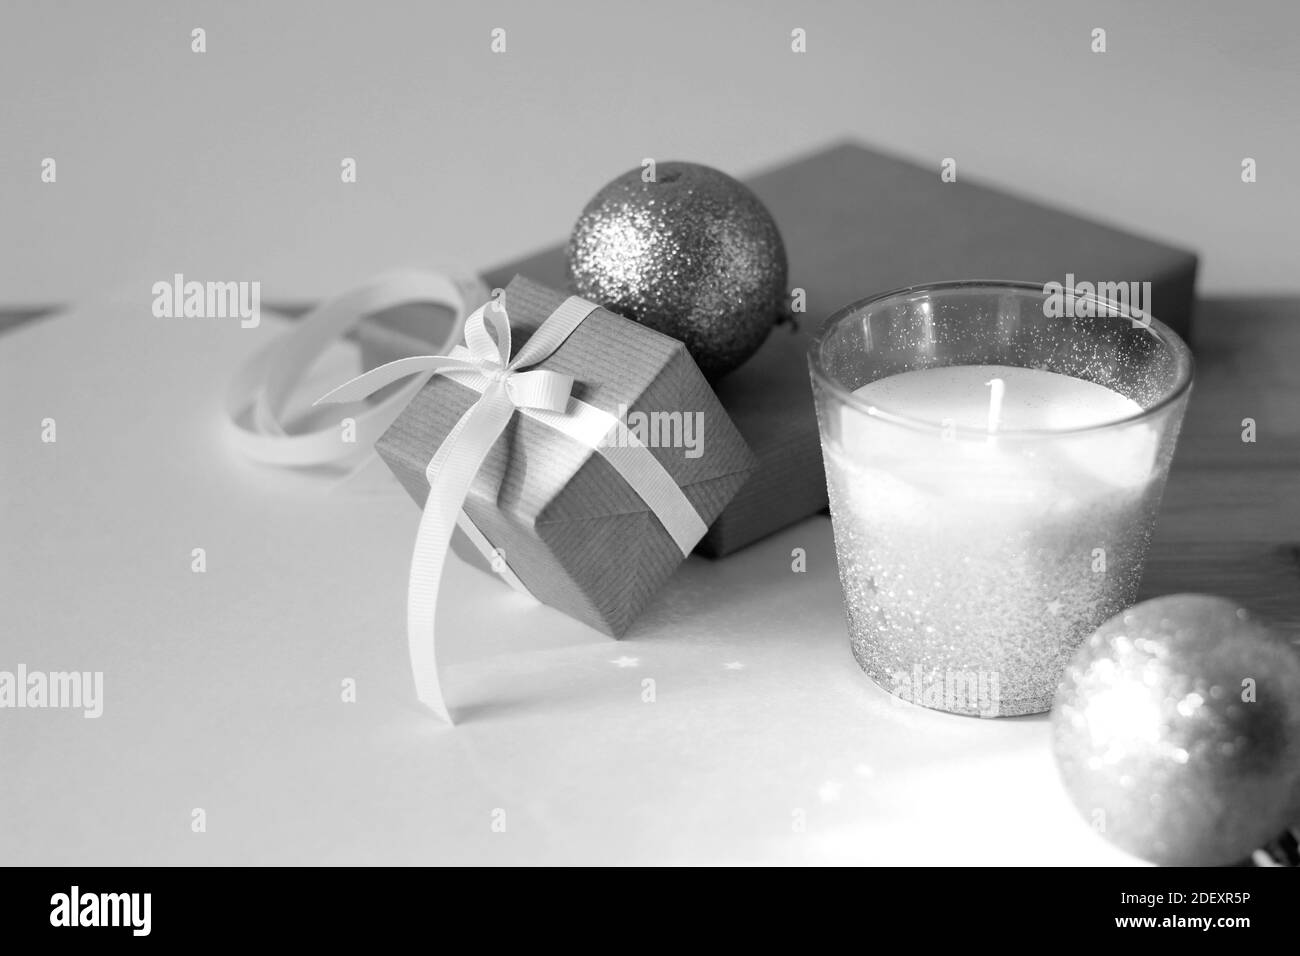 Christmas Composition of Decorated Gift Box, Shiny Ornaments, Candle. Stock Photo